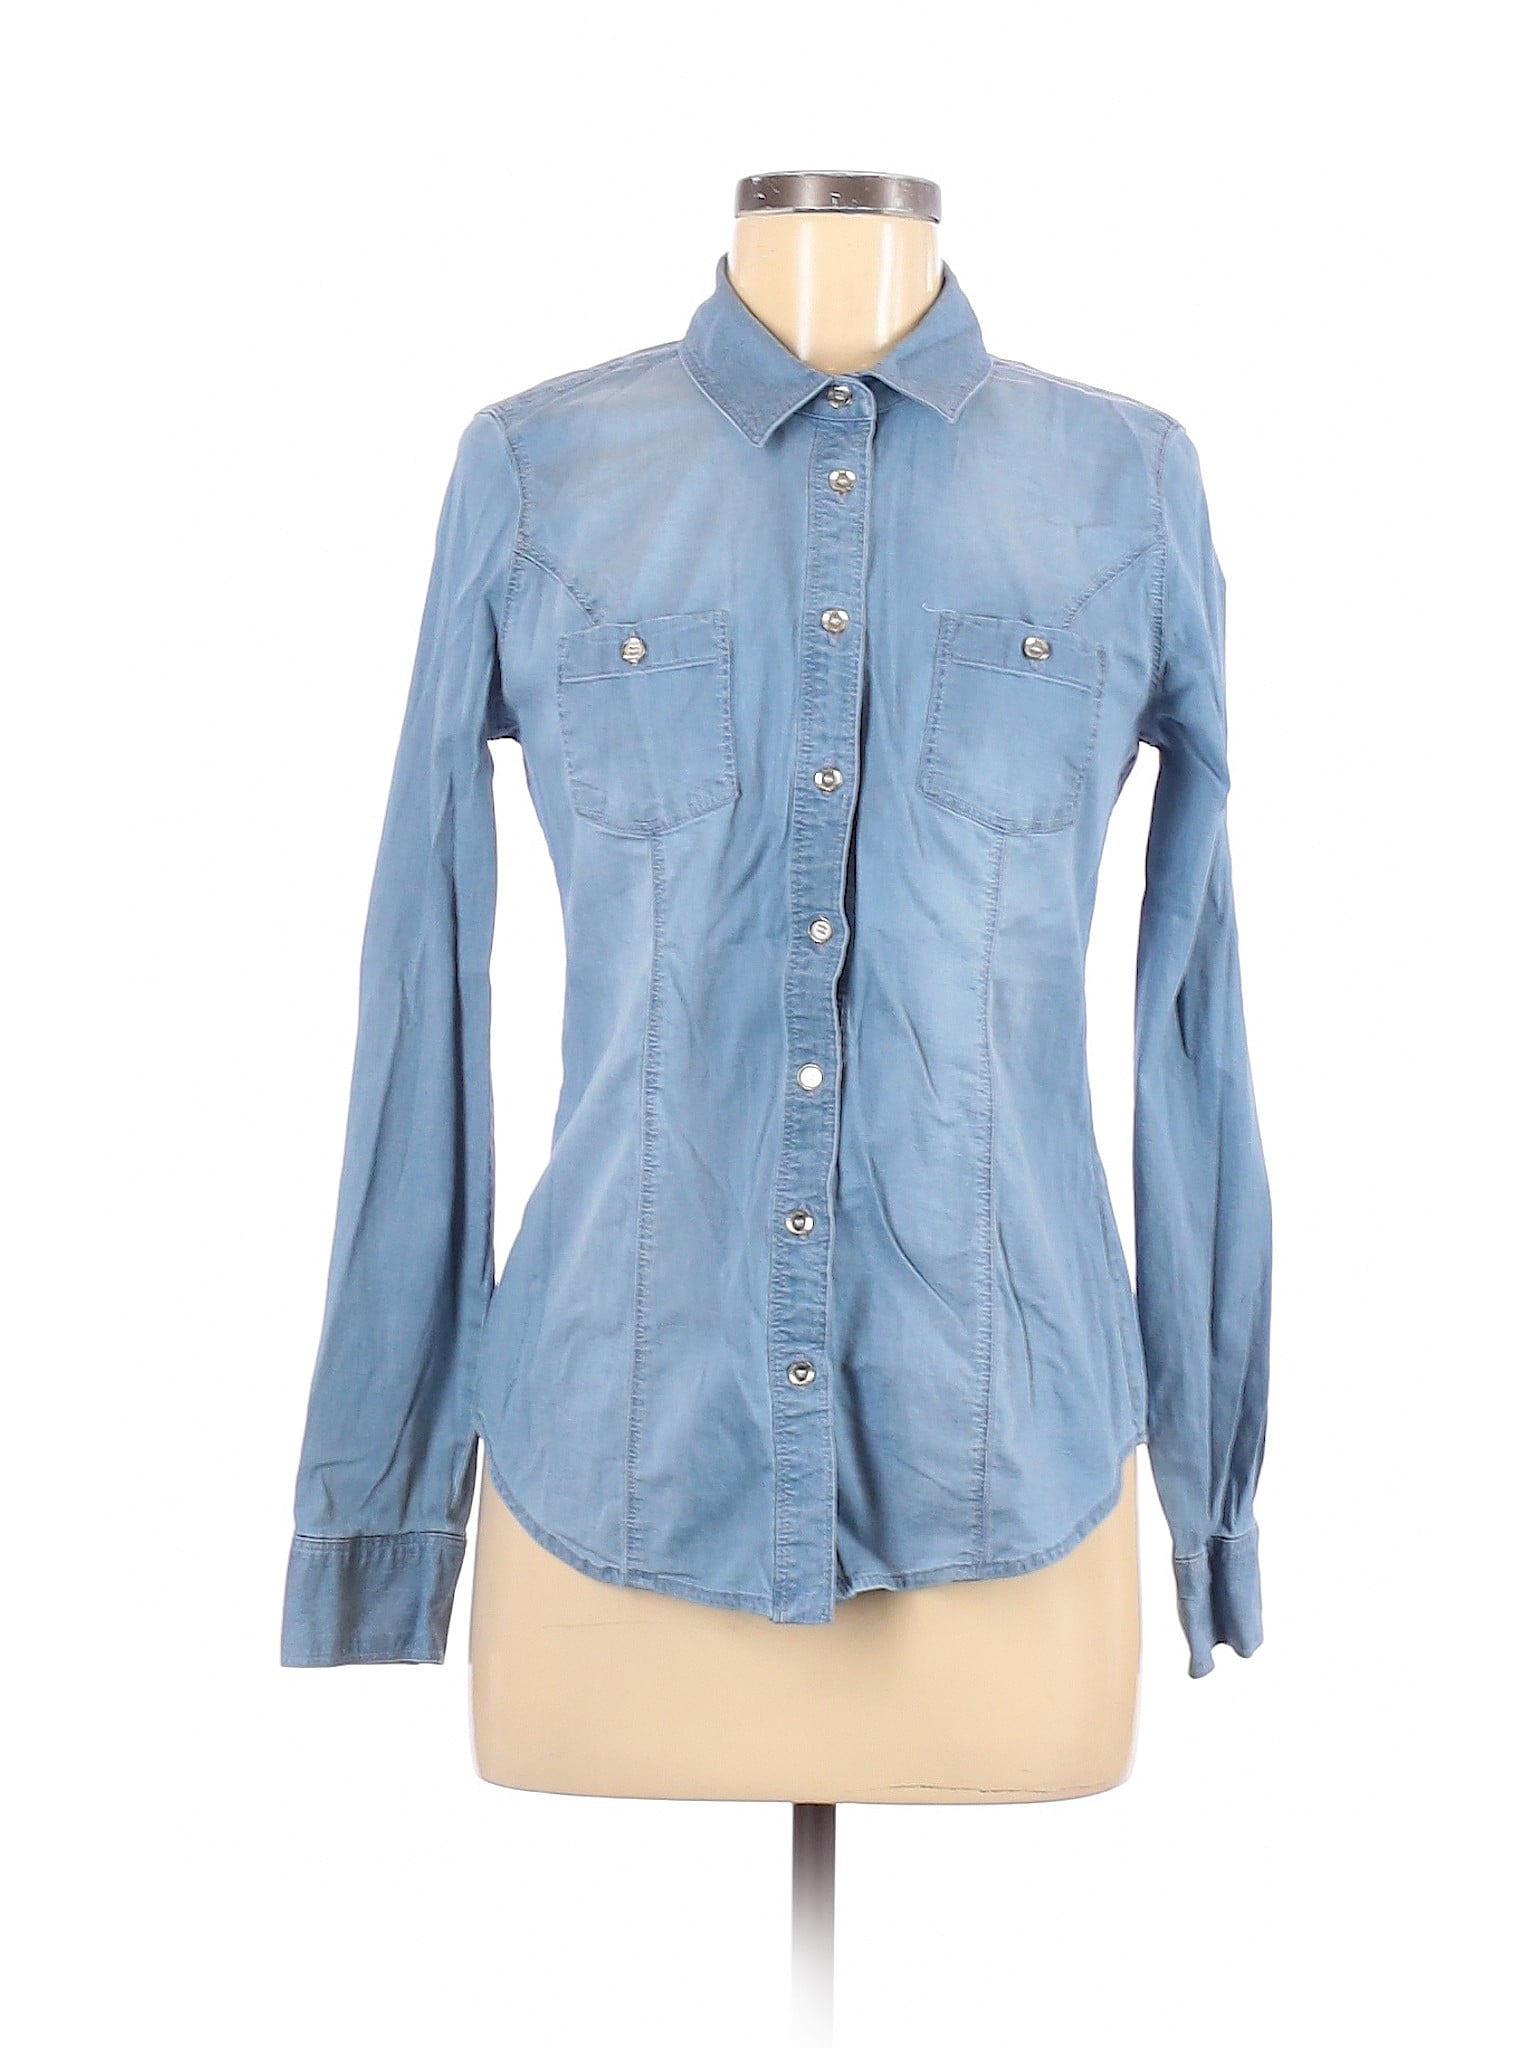 GUESS - Pre-Owned Guess Women's Size M Long Sleeve Button-Down Shirt ...